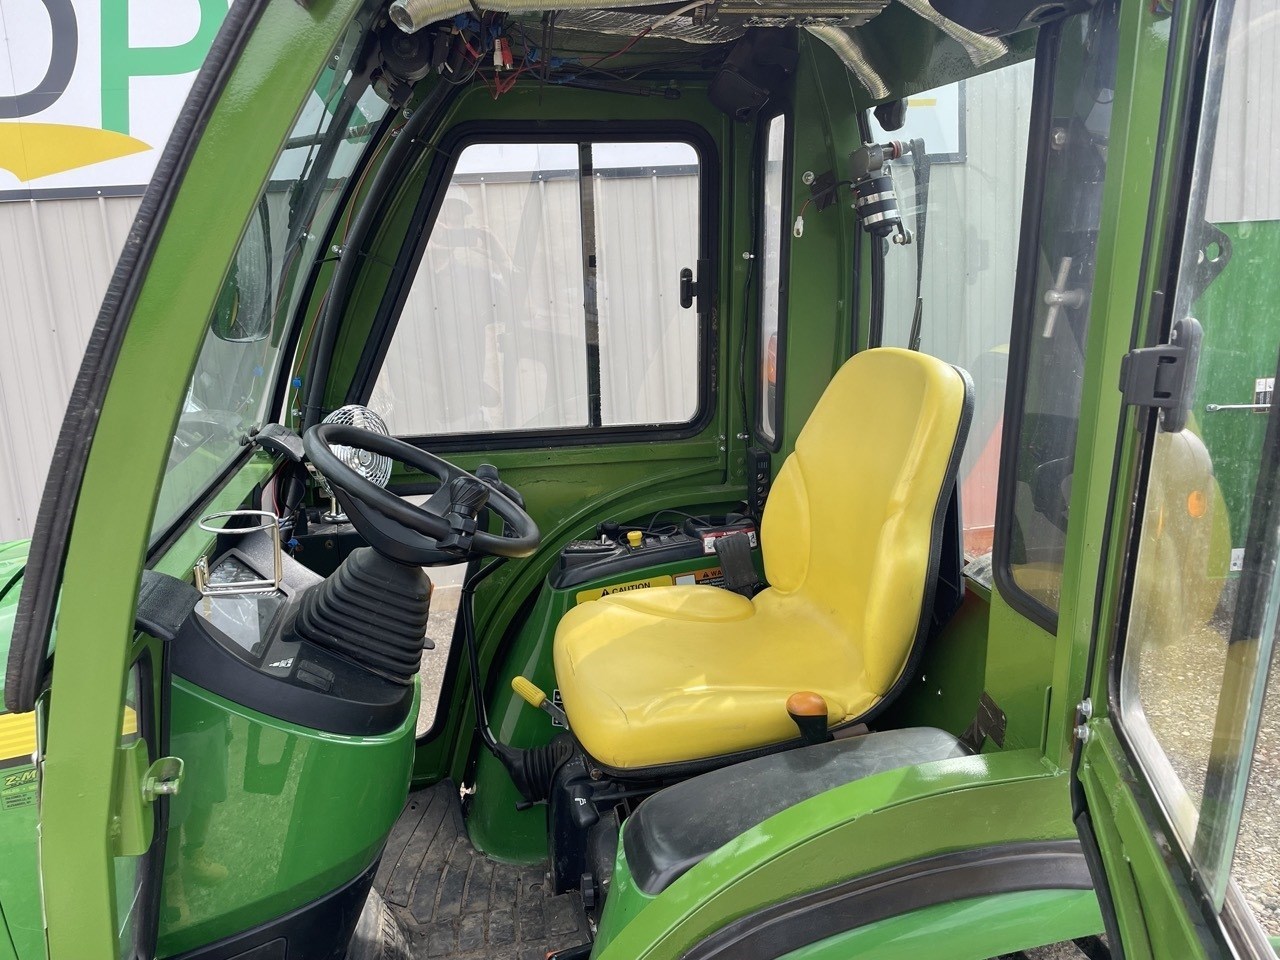 2016 John Deere 3033R Tractor - Compact Utility For Sale